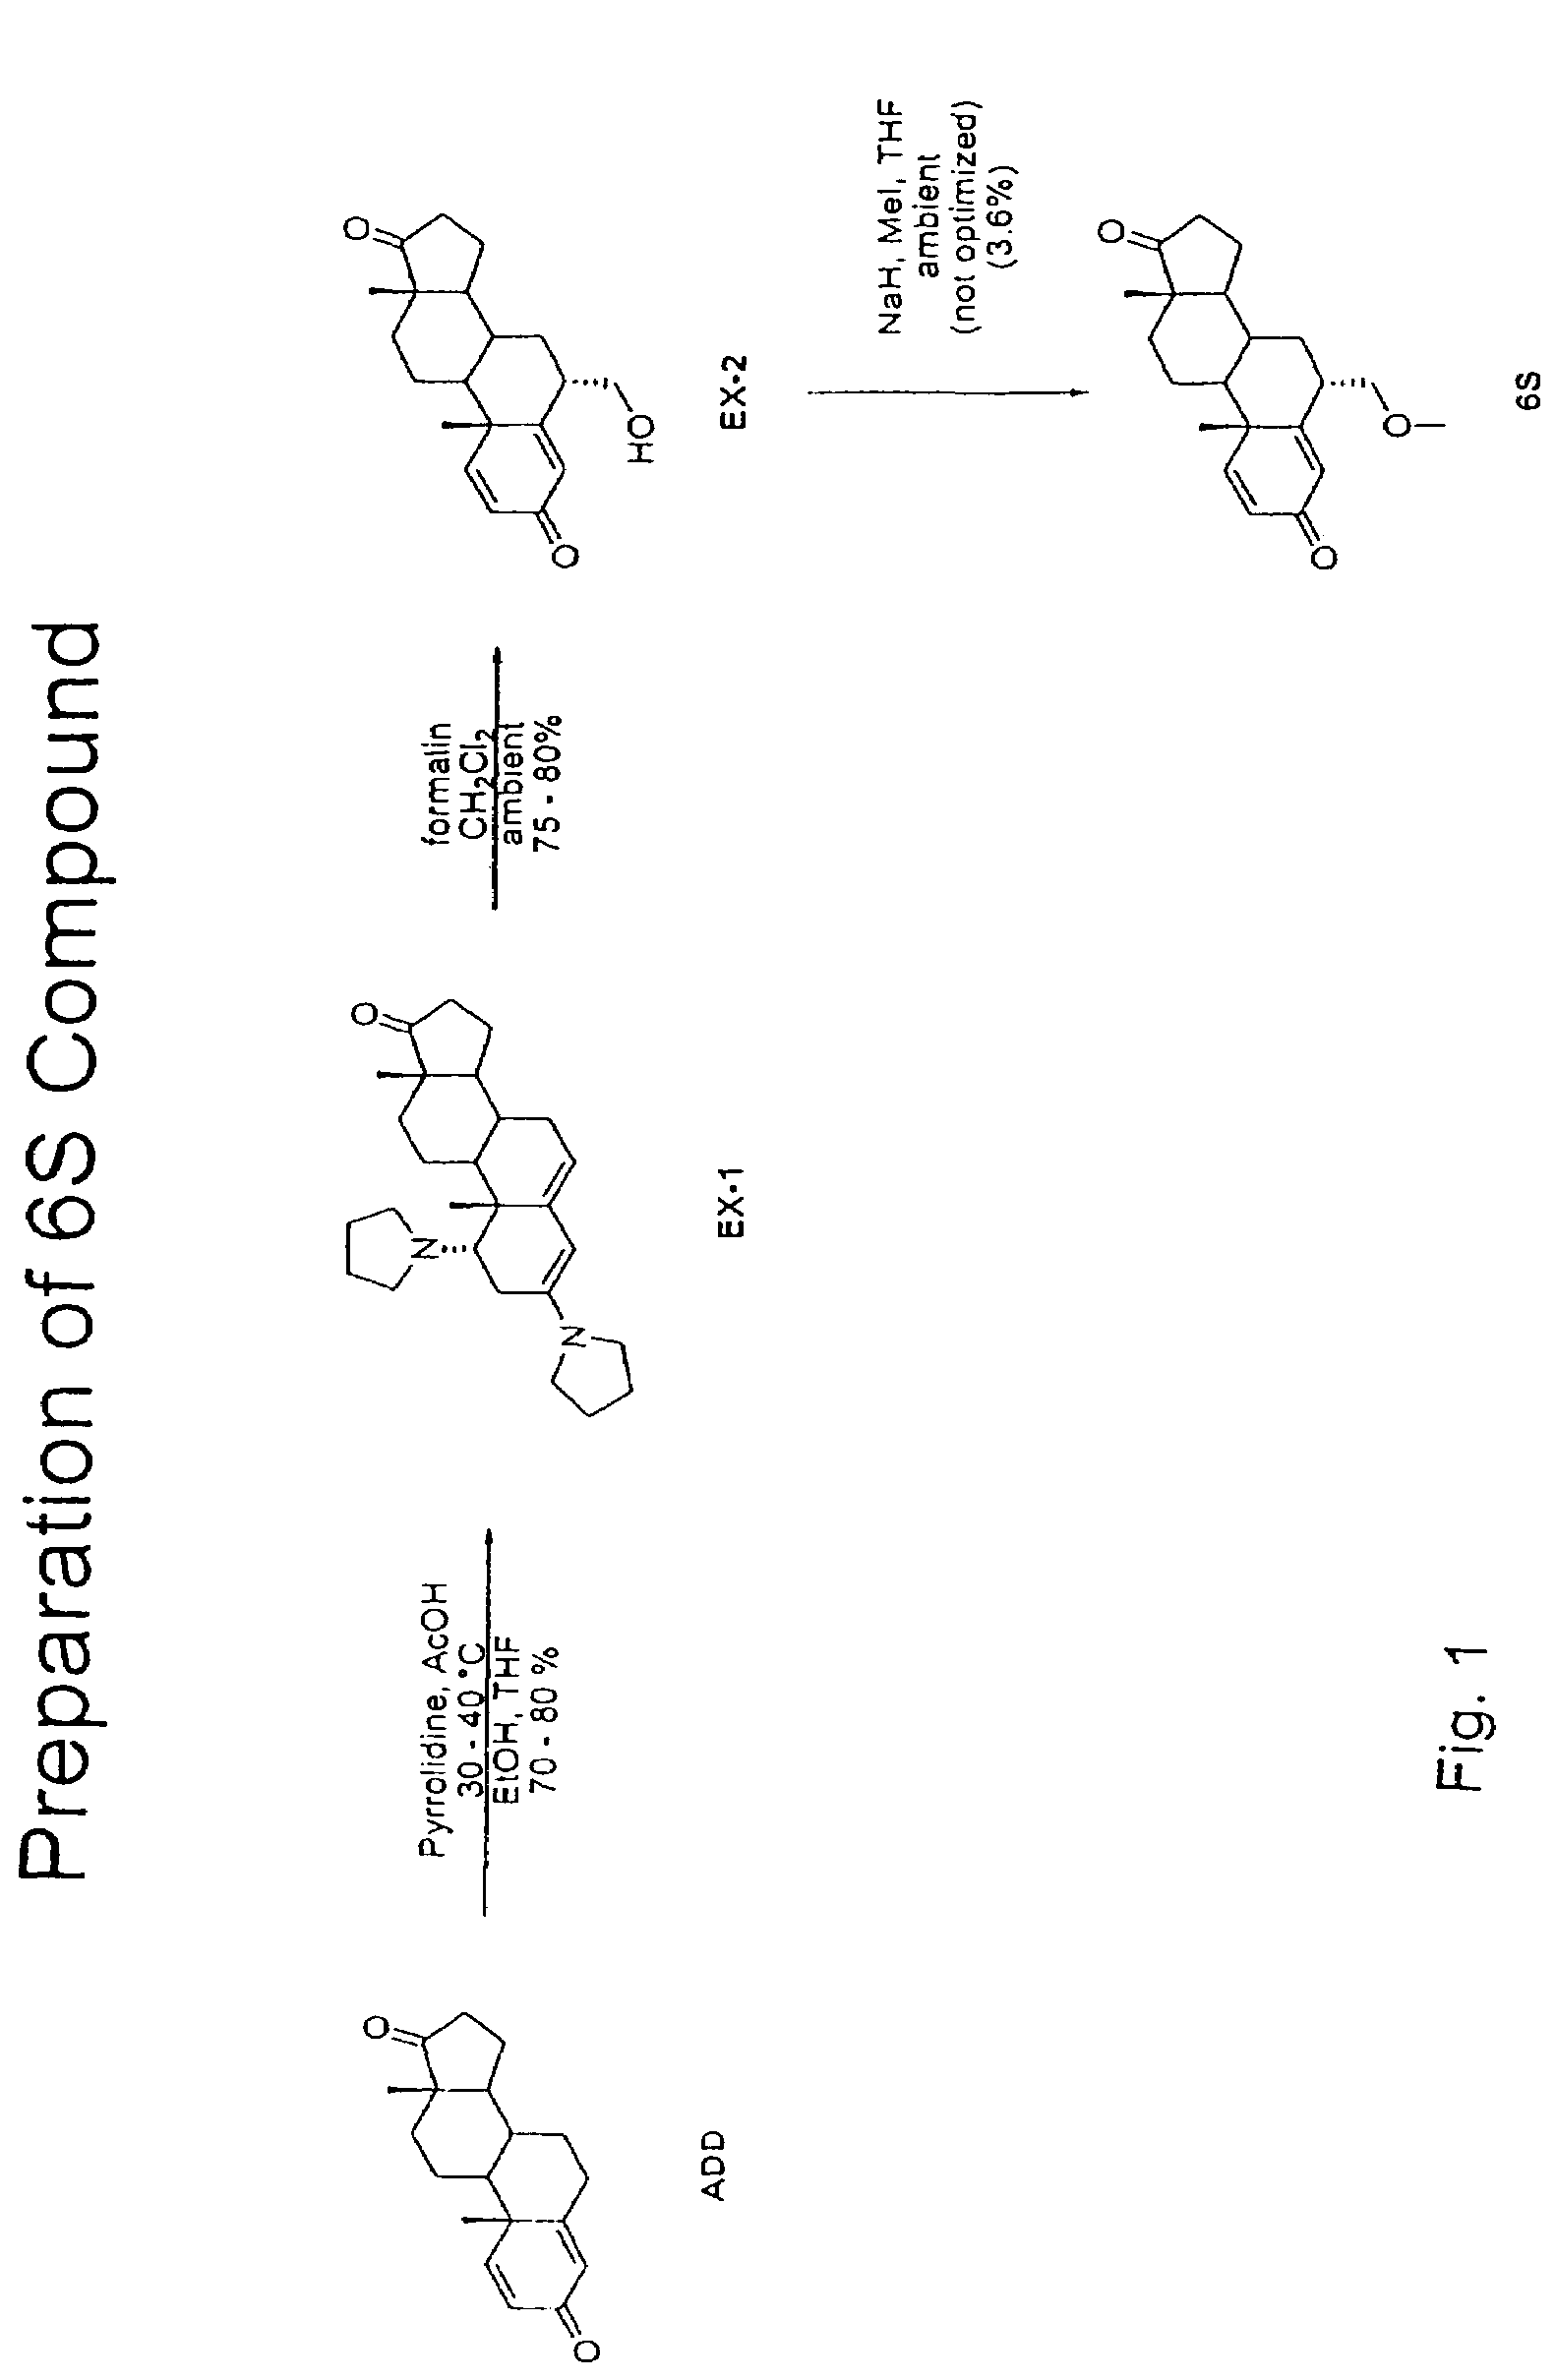 Exemestane compounds, compositions and related methods of use